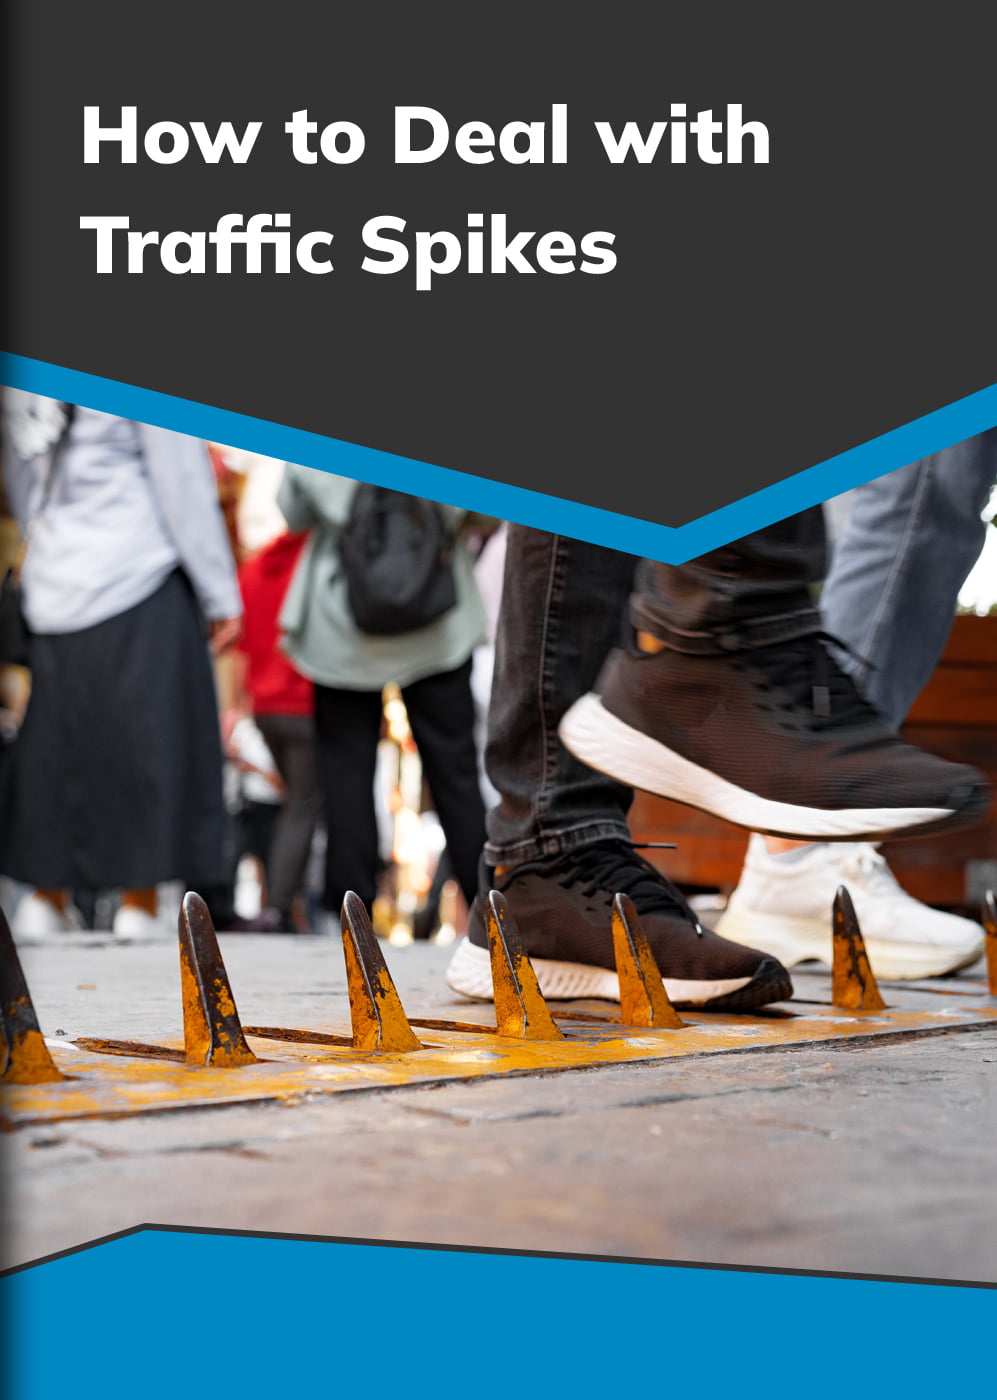 How-to-Deal-with-Traffic-Spikes